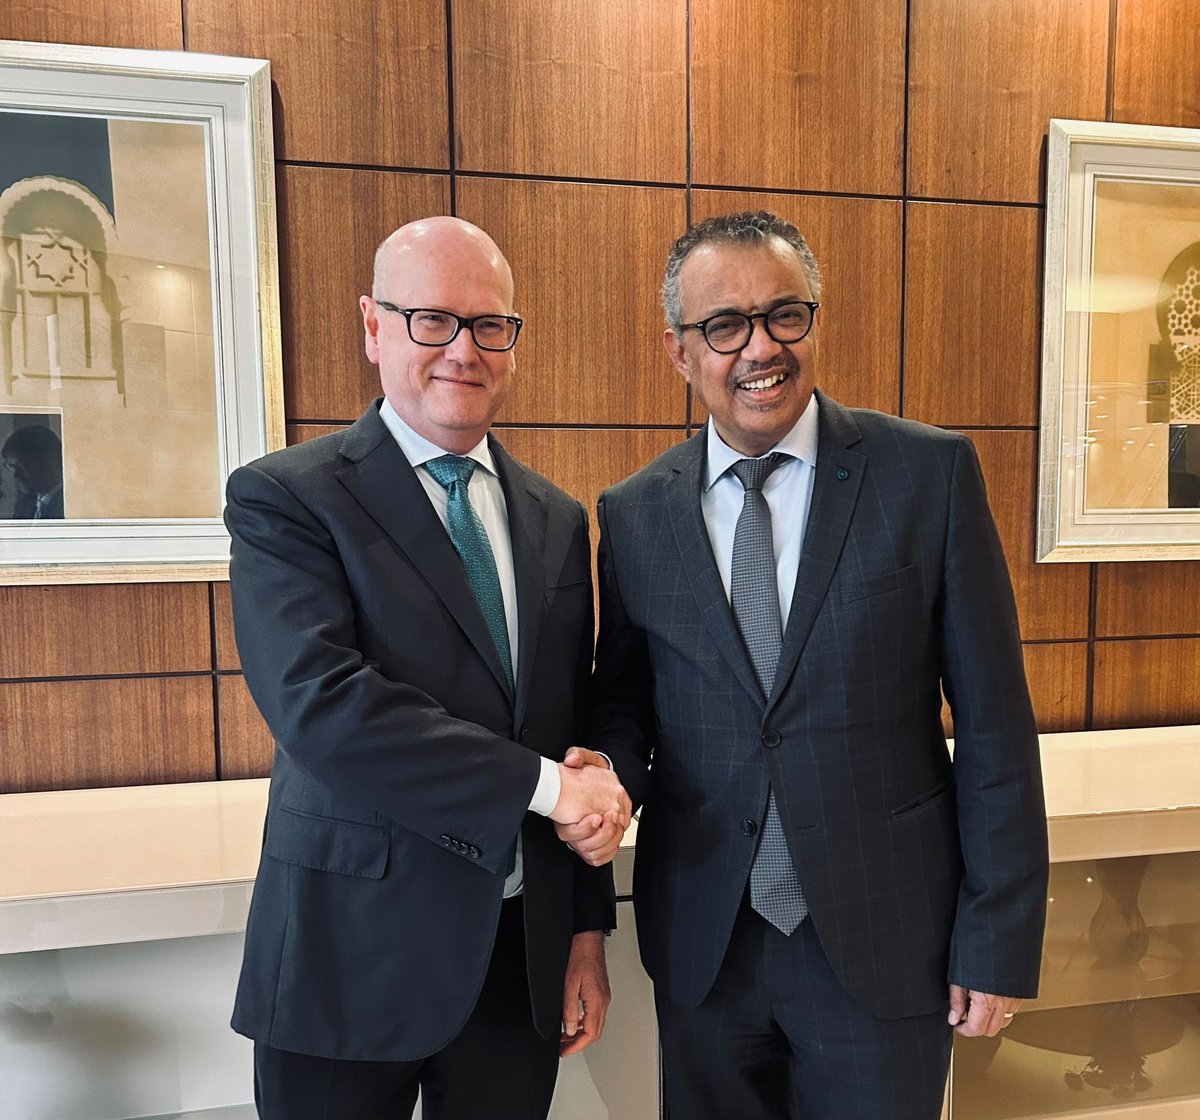 Together with @WHO @DrTedros, very positive exchanges on how our two institutions are cooperating to improving global health and supporting universal healthcare - eradicating polio, and strengthening primary healthcare.